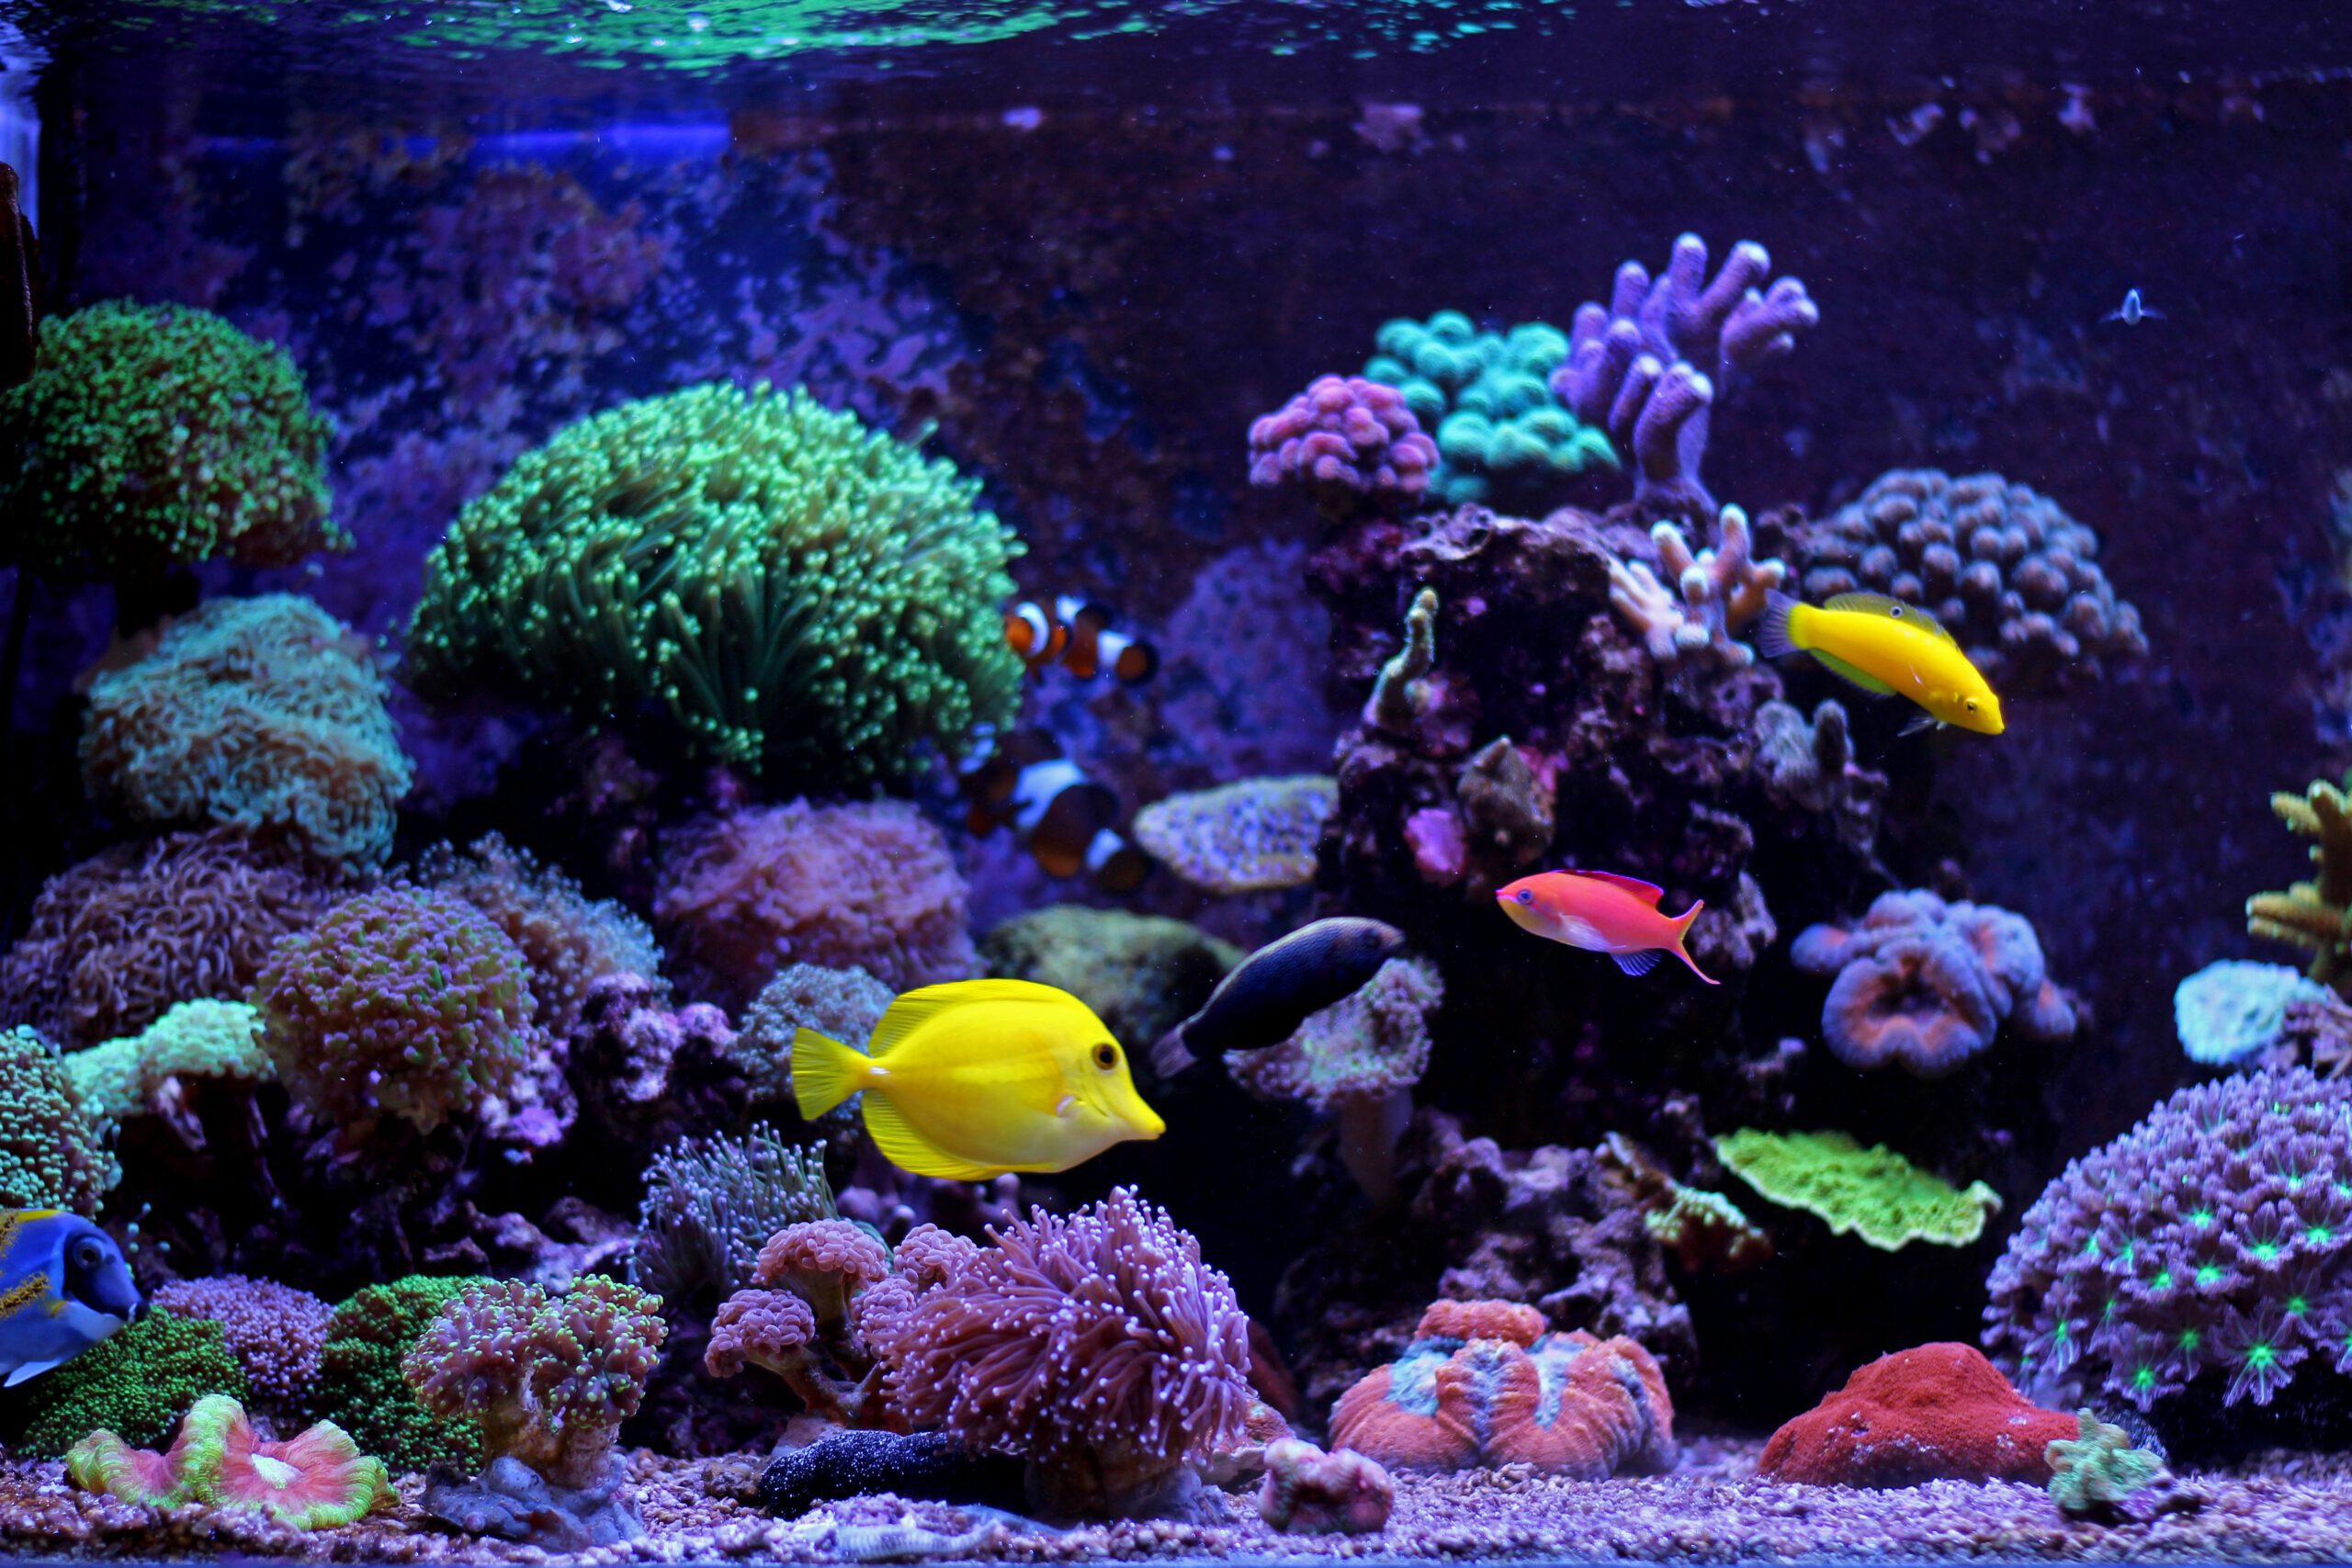 Vibrant fish swimming in coral filled fish tank